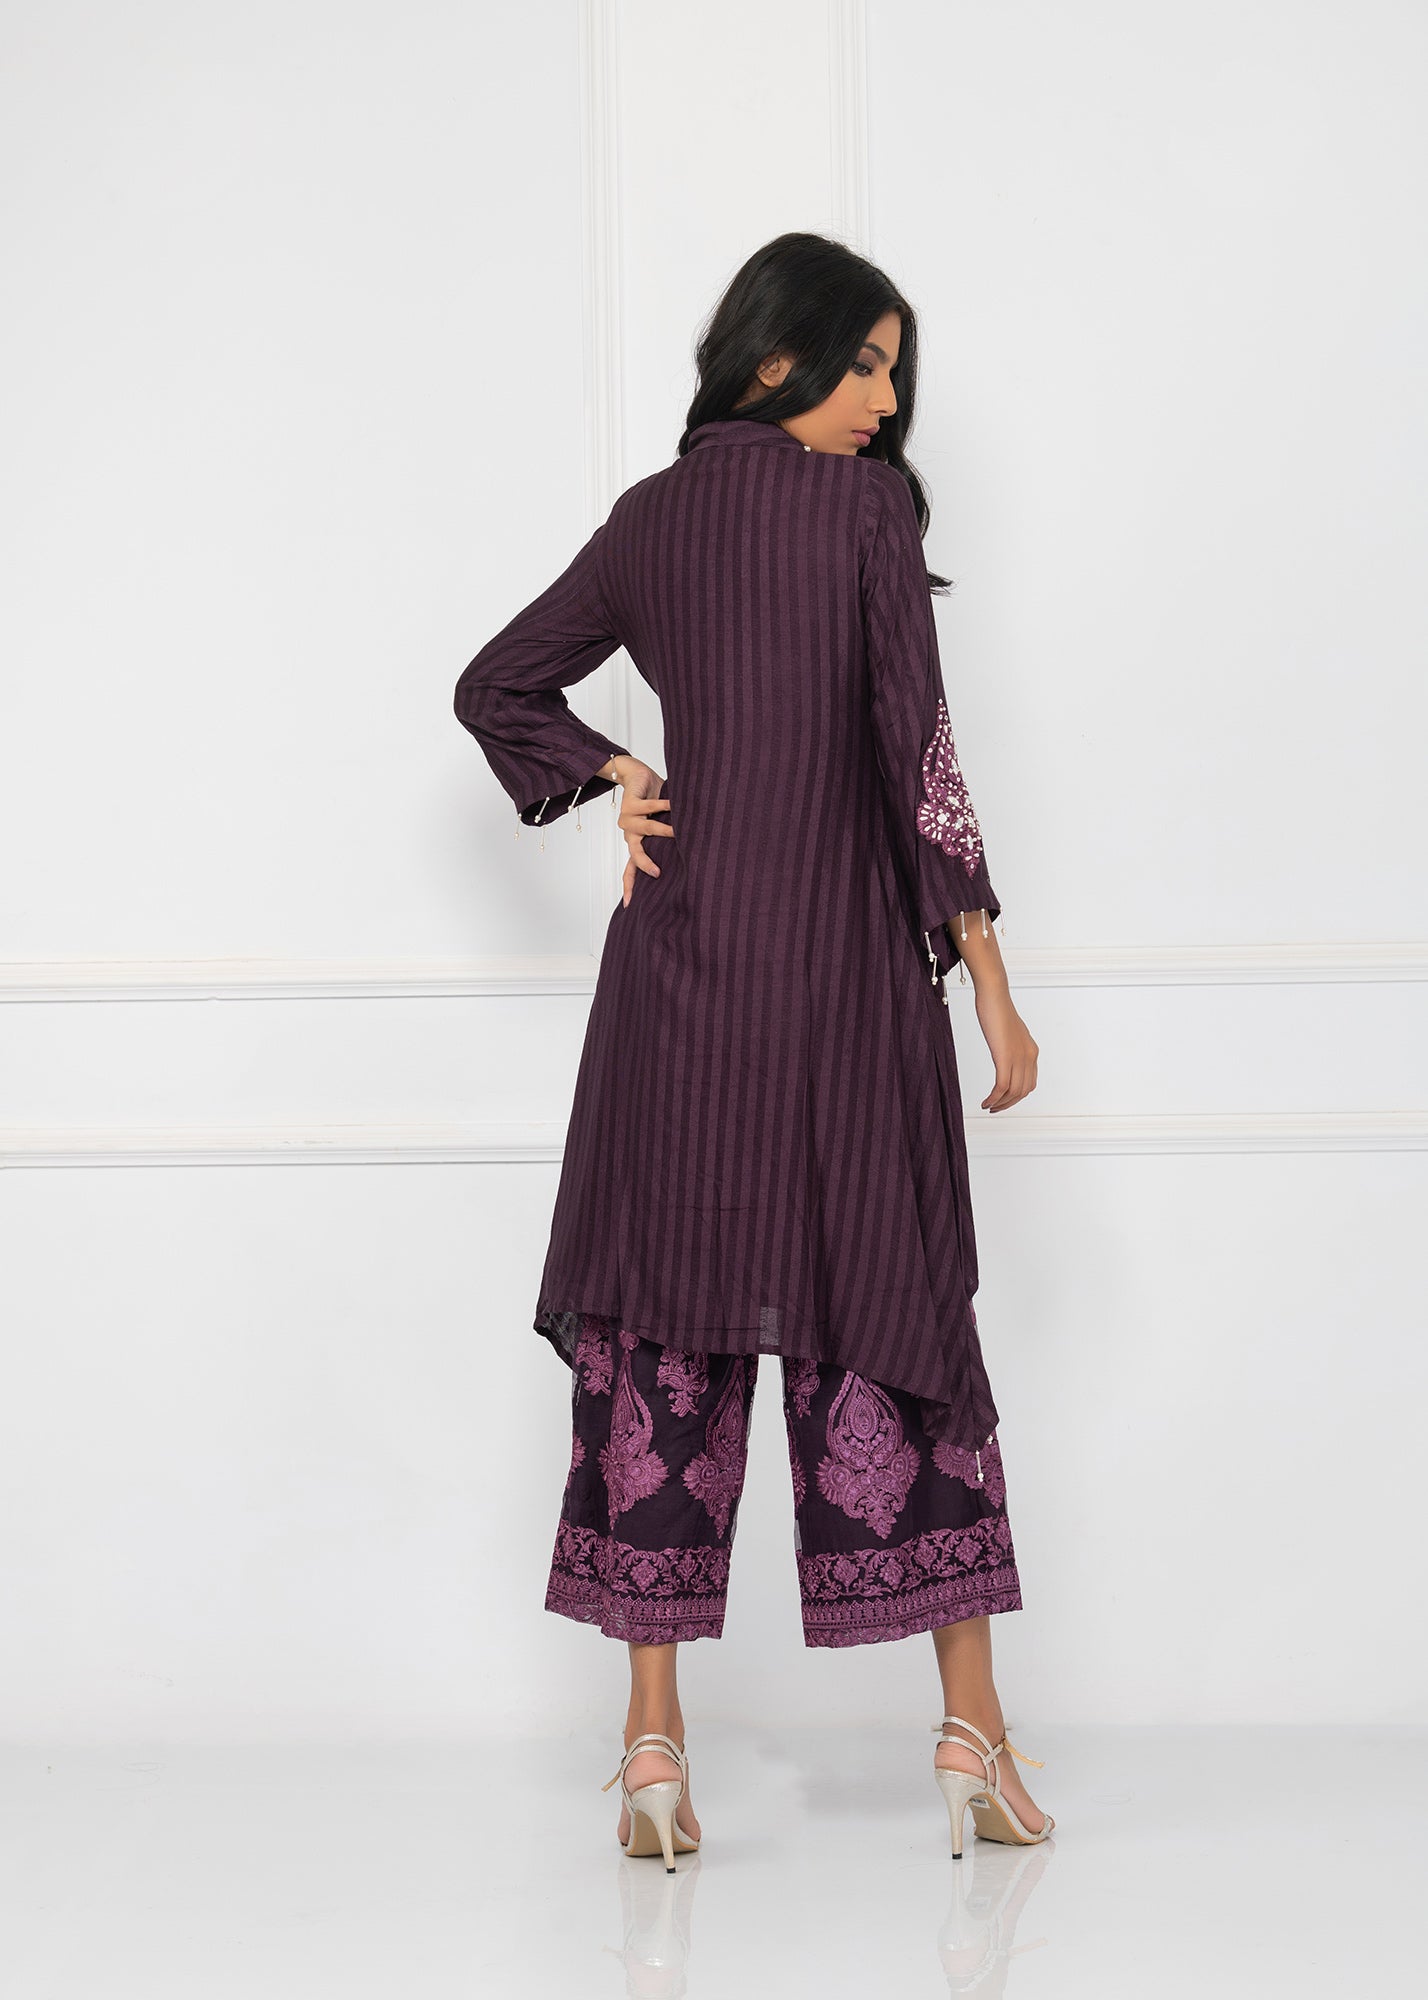 Add Some Elegance with Aubergine Pearl's Pakistani Womens Dresses ...